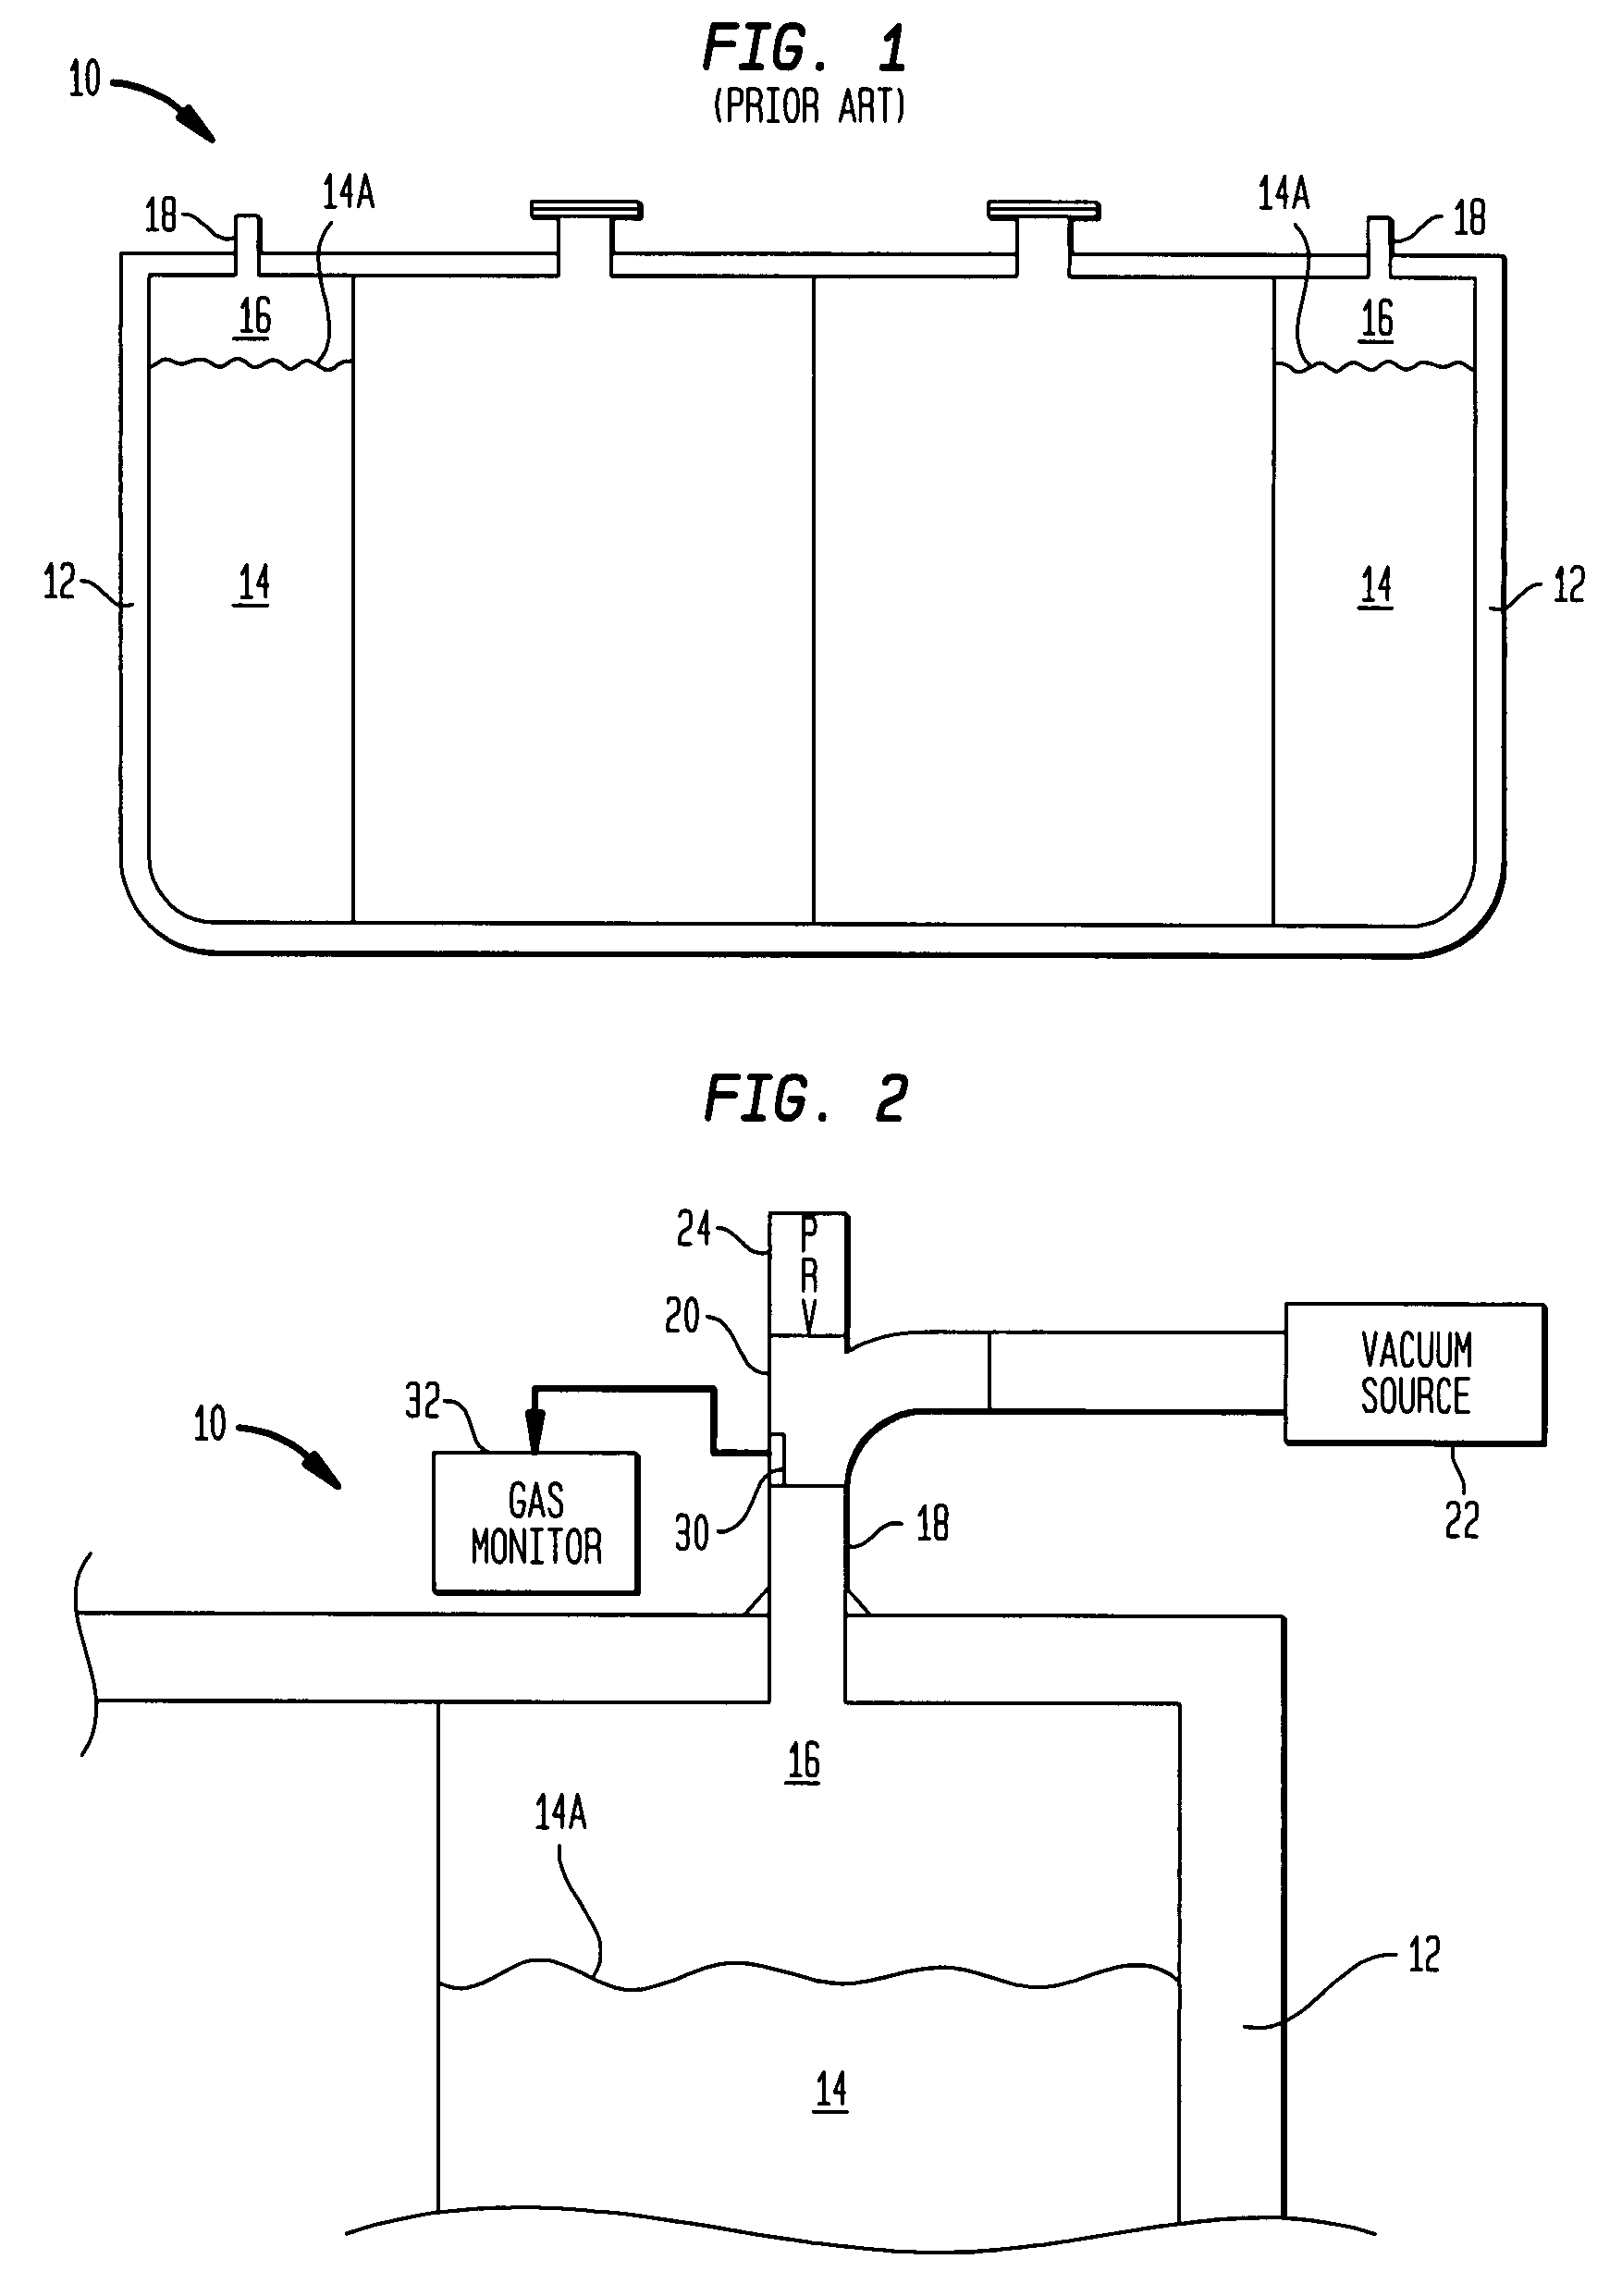 "In-situ" ballast water treatment system and method